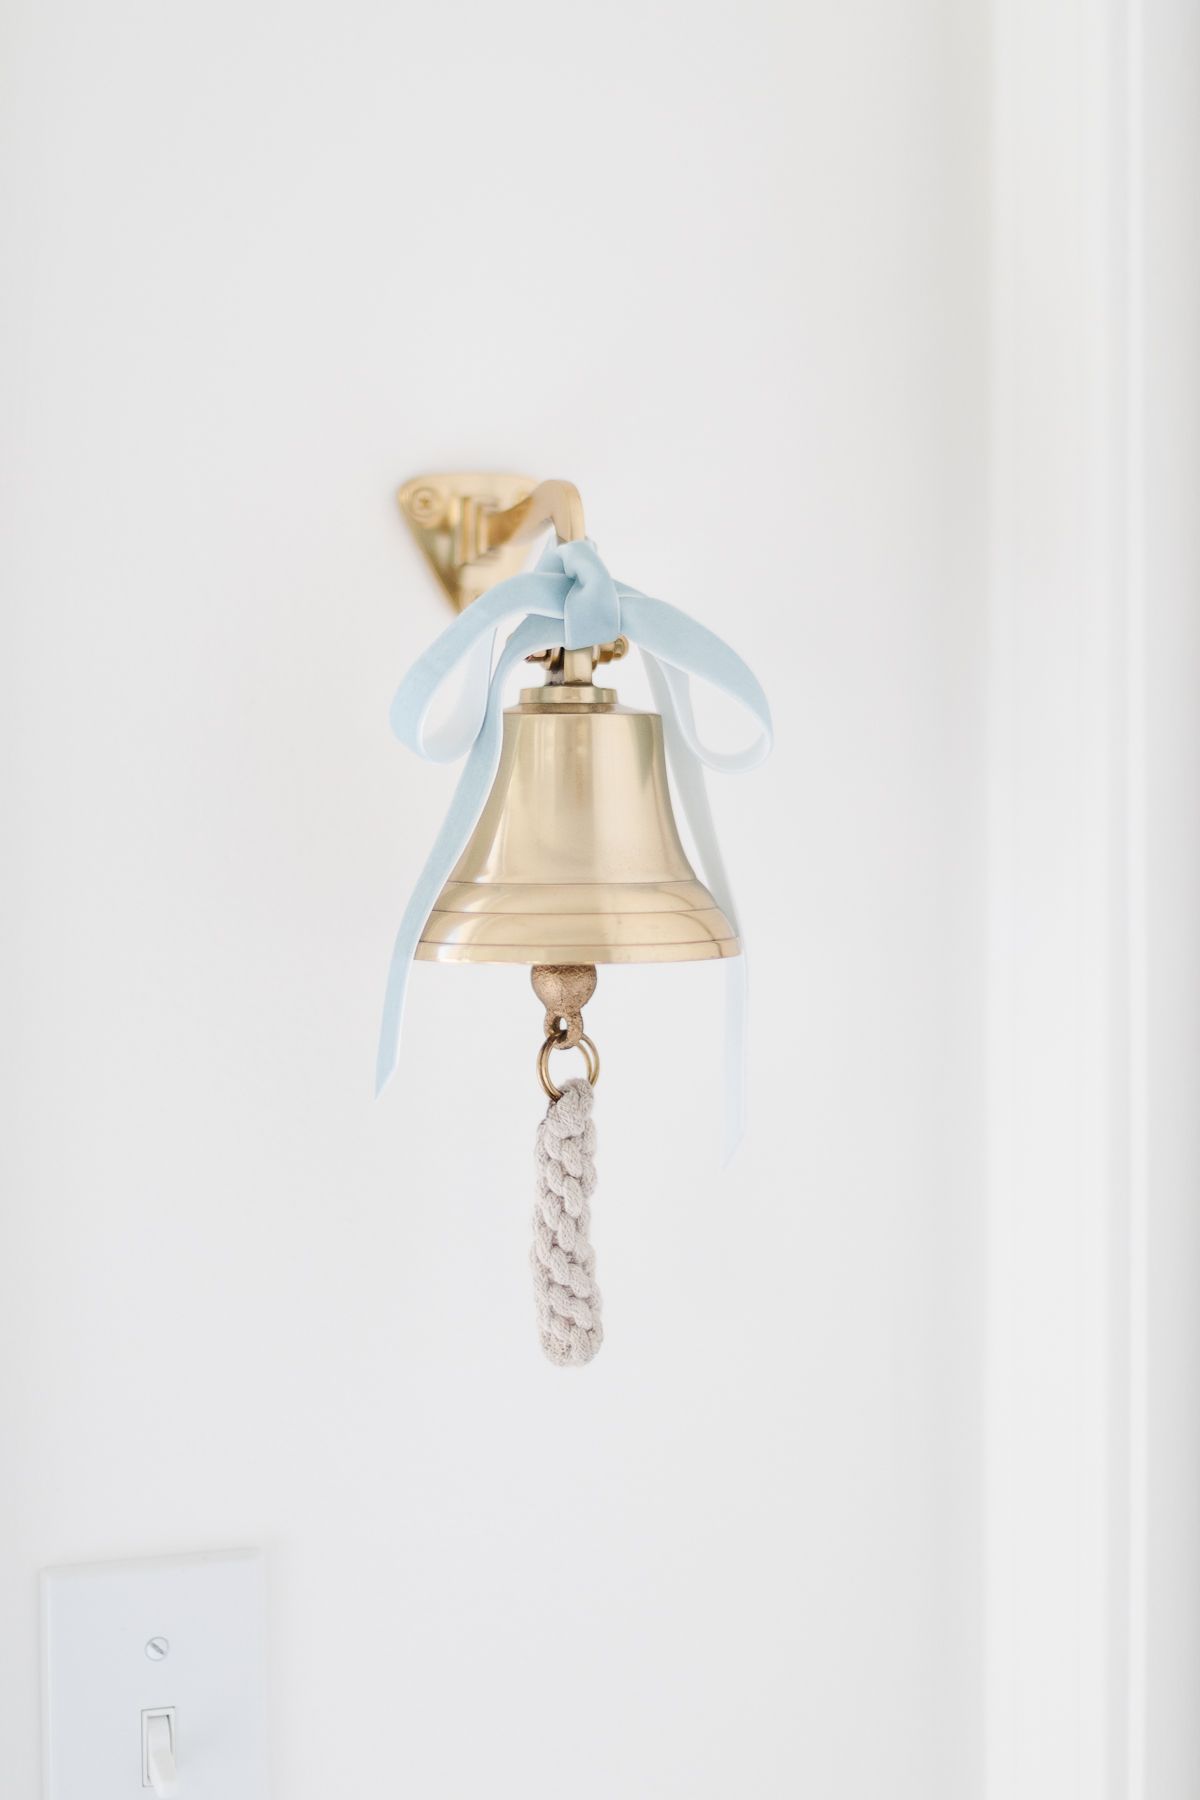 A brass bell on a white wall, tied with a blue velvet bow.